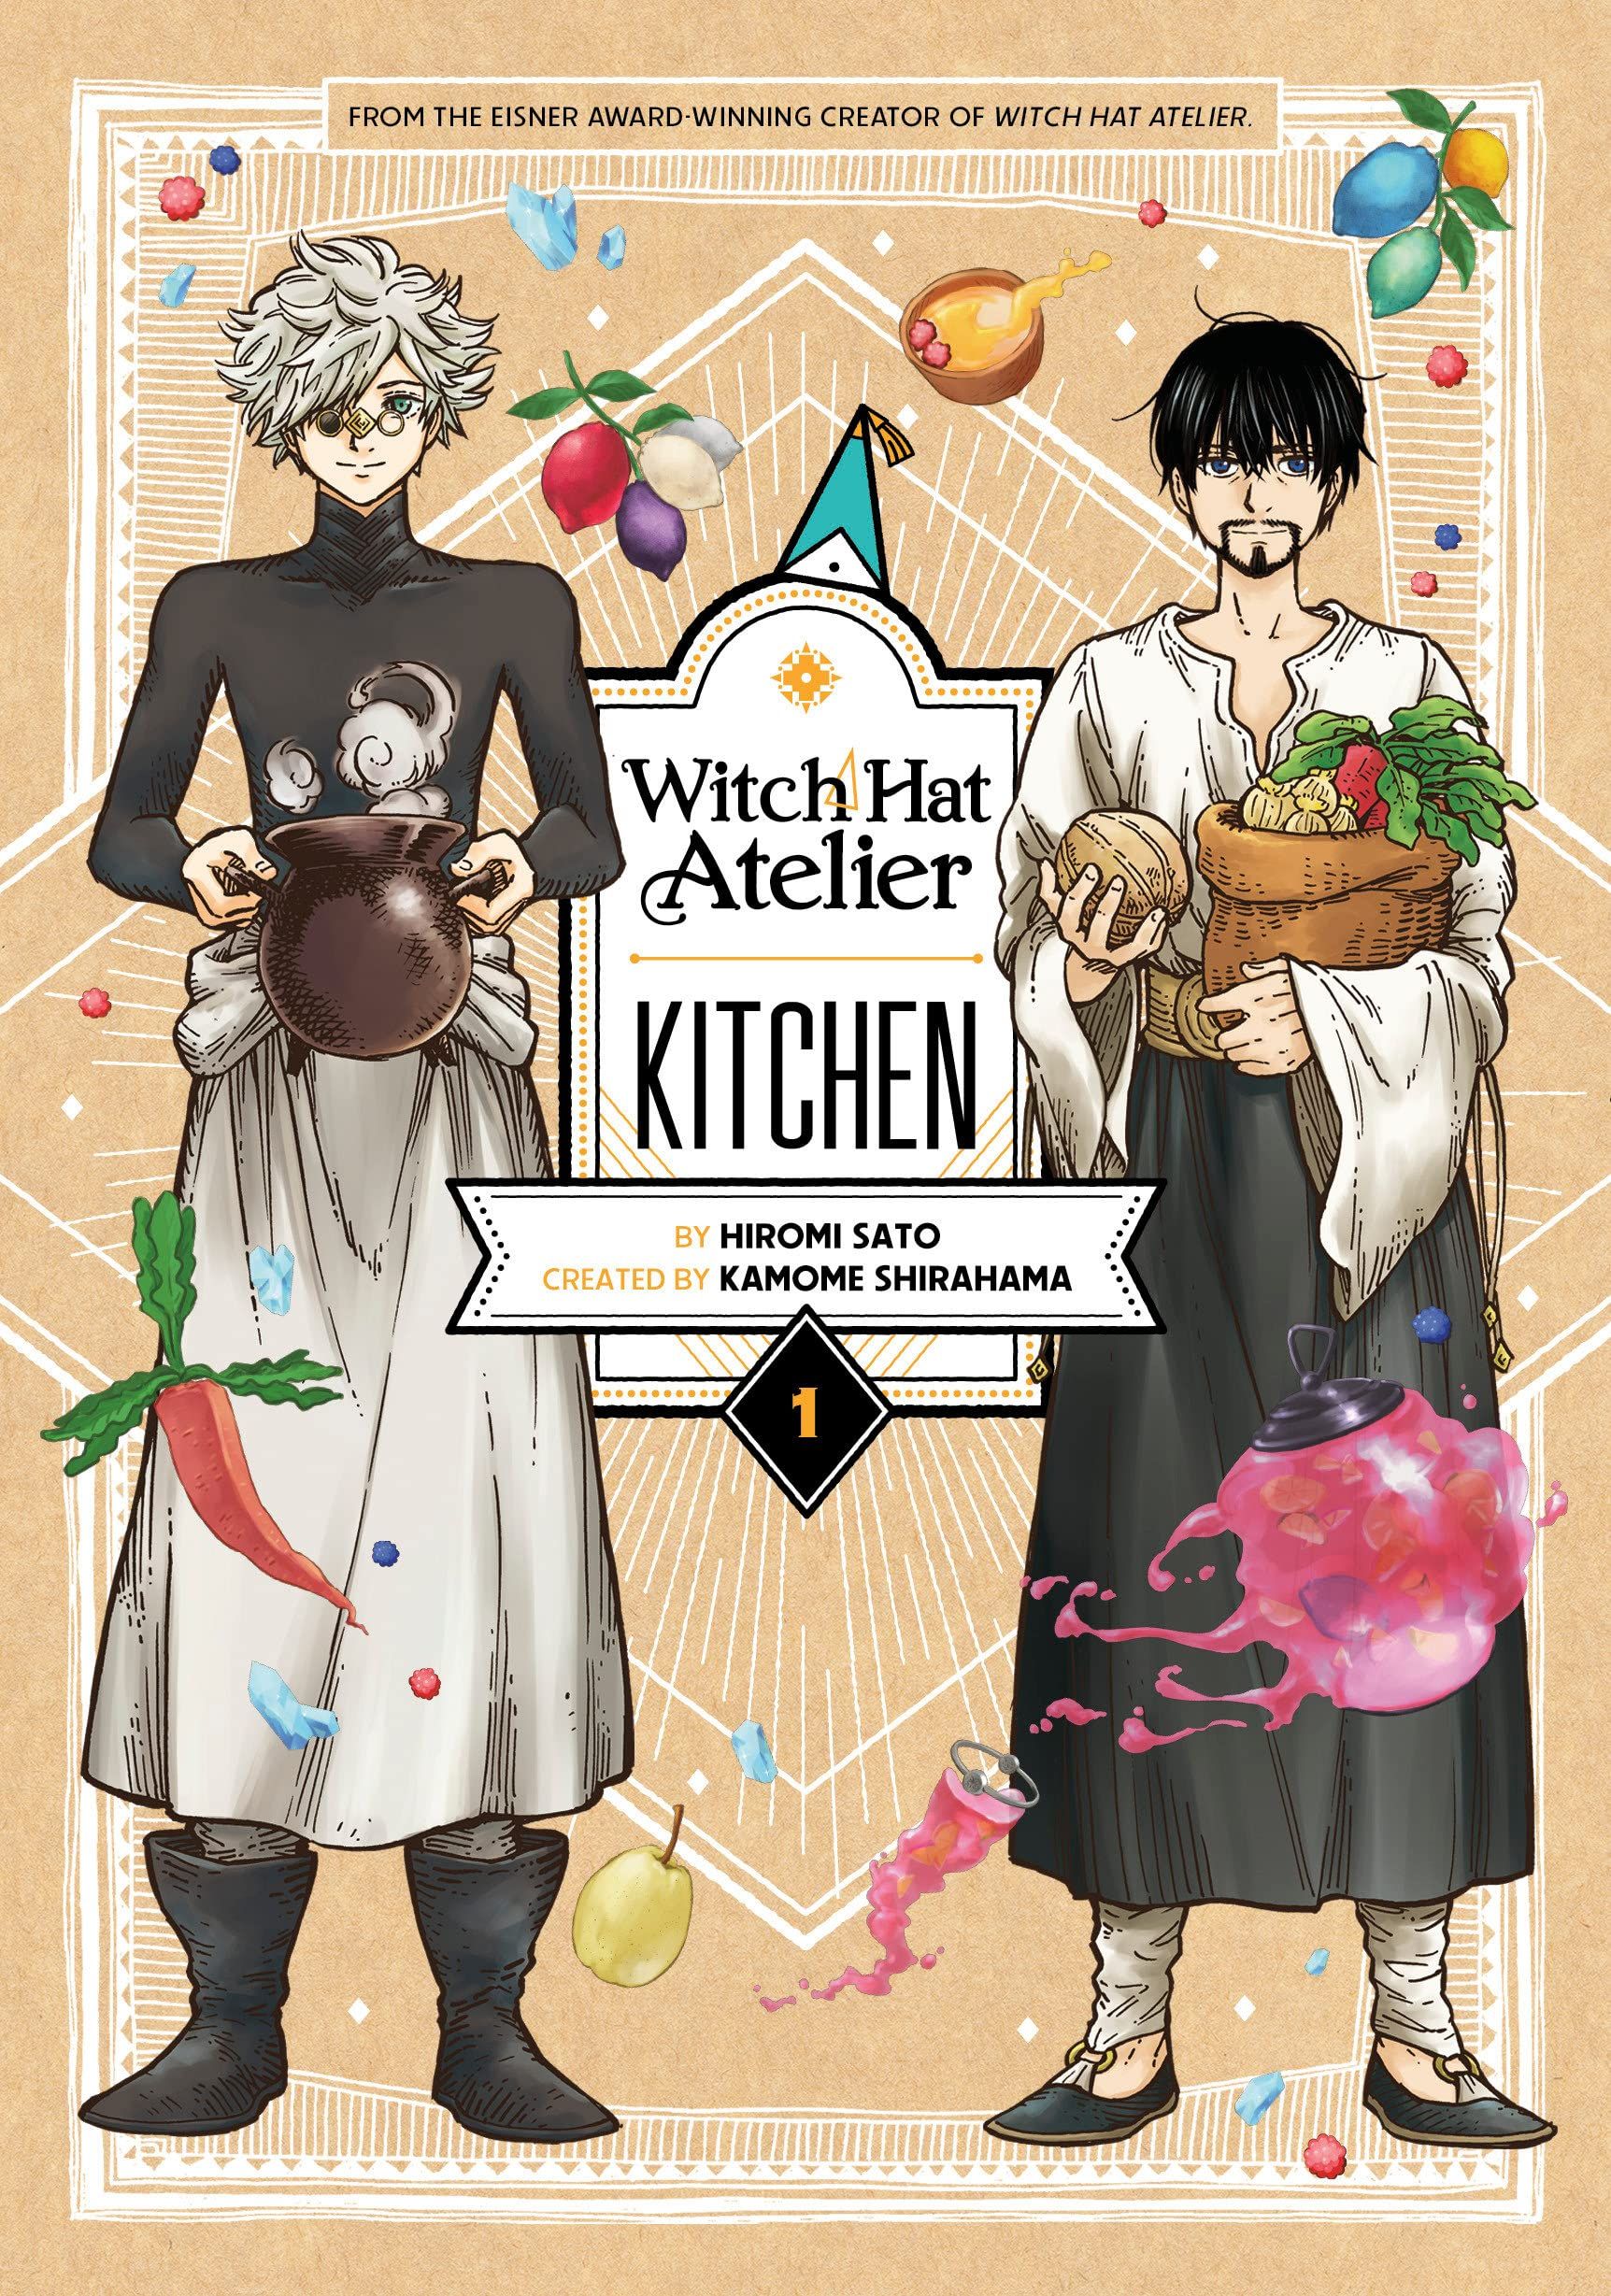 Witch Hat Atelier Kitchen by Hiromi Sato and Kamome Shirahama cover